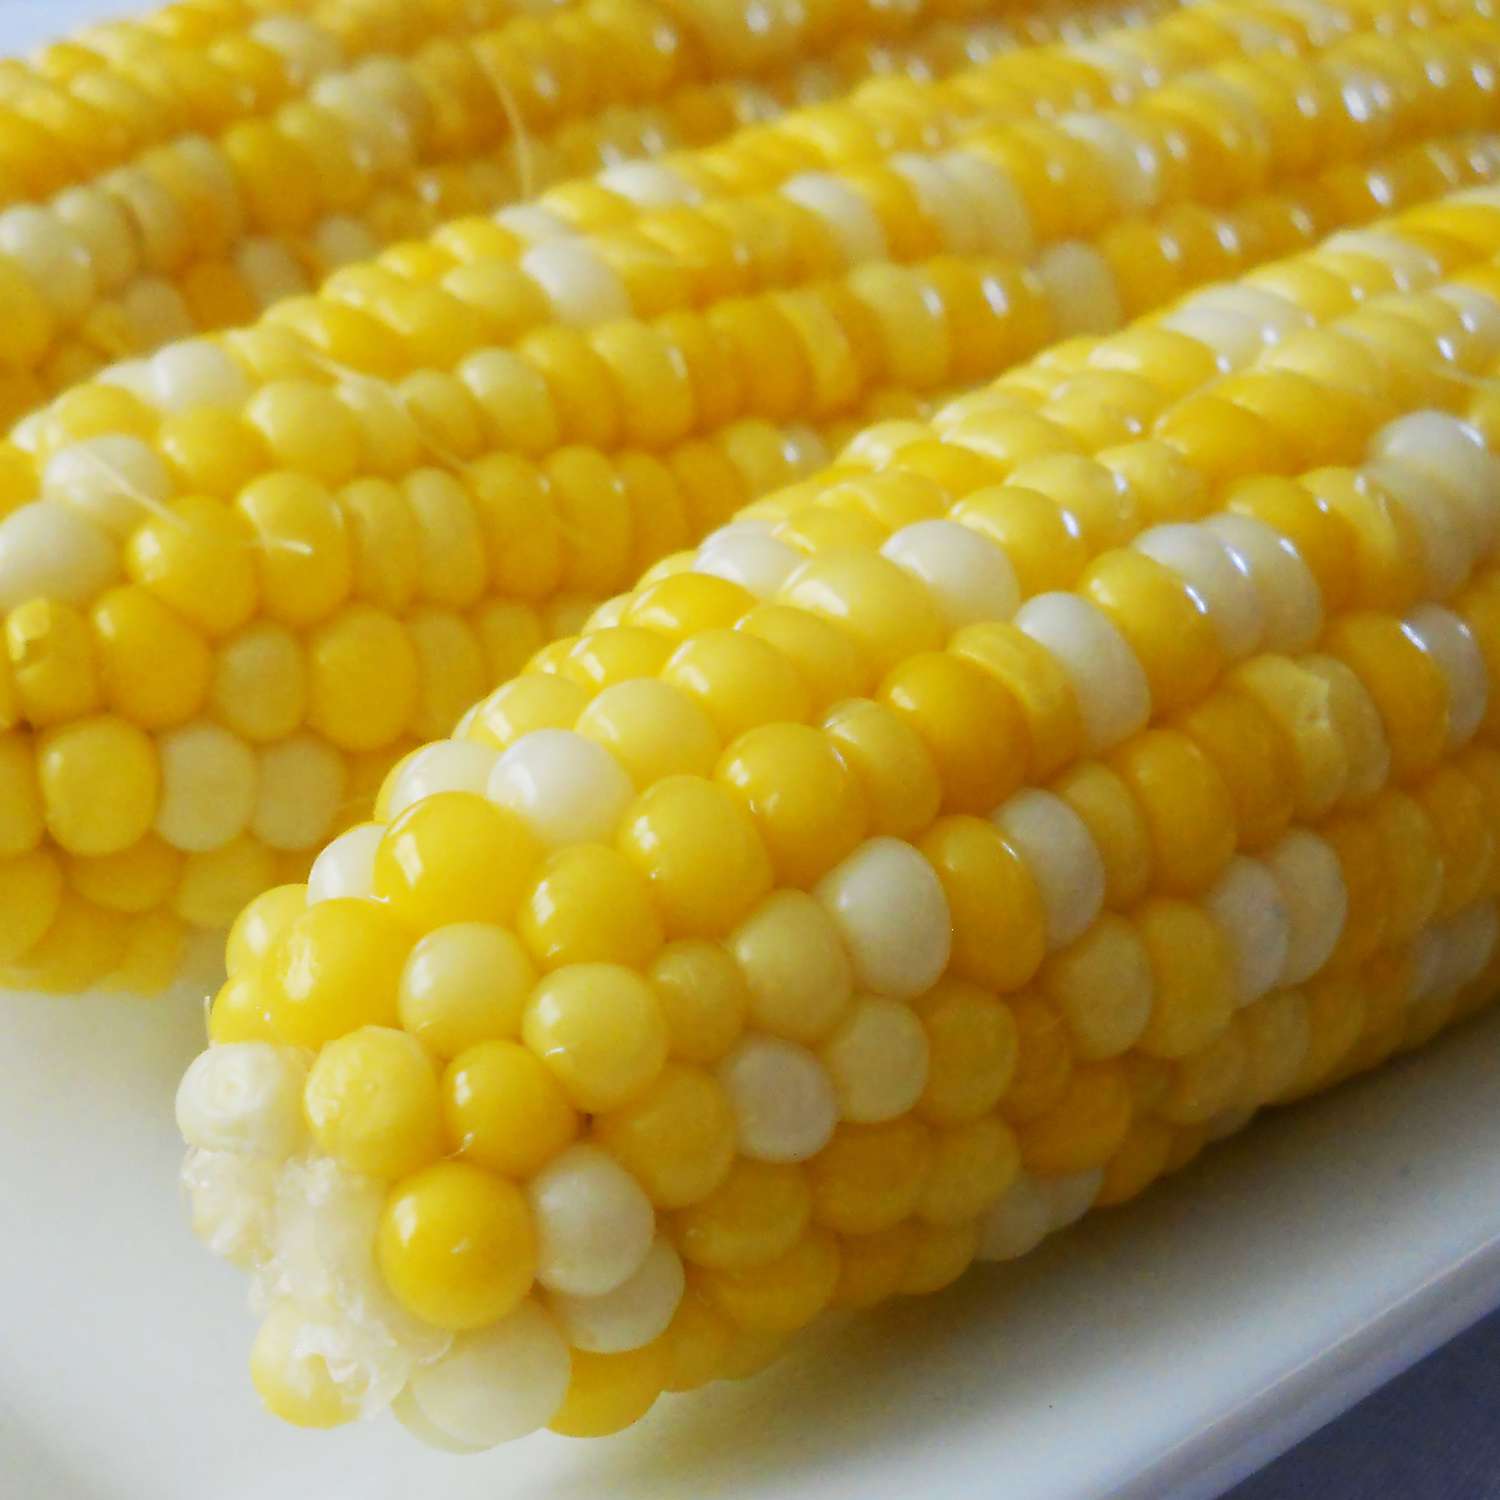 donna bowen recommends Corn On The Cob Images